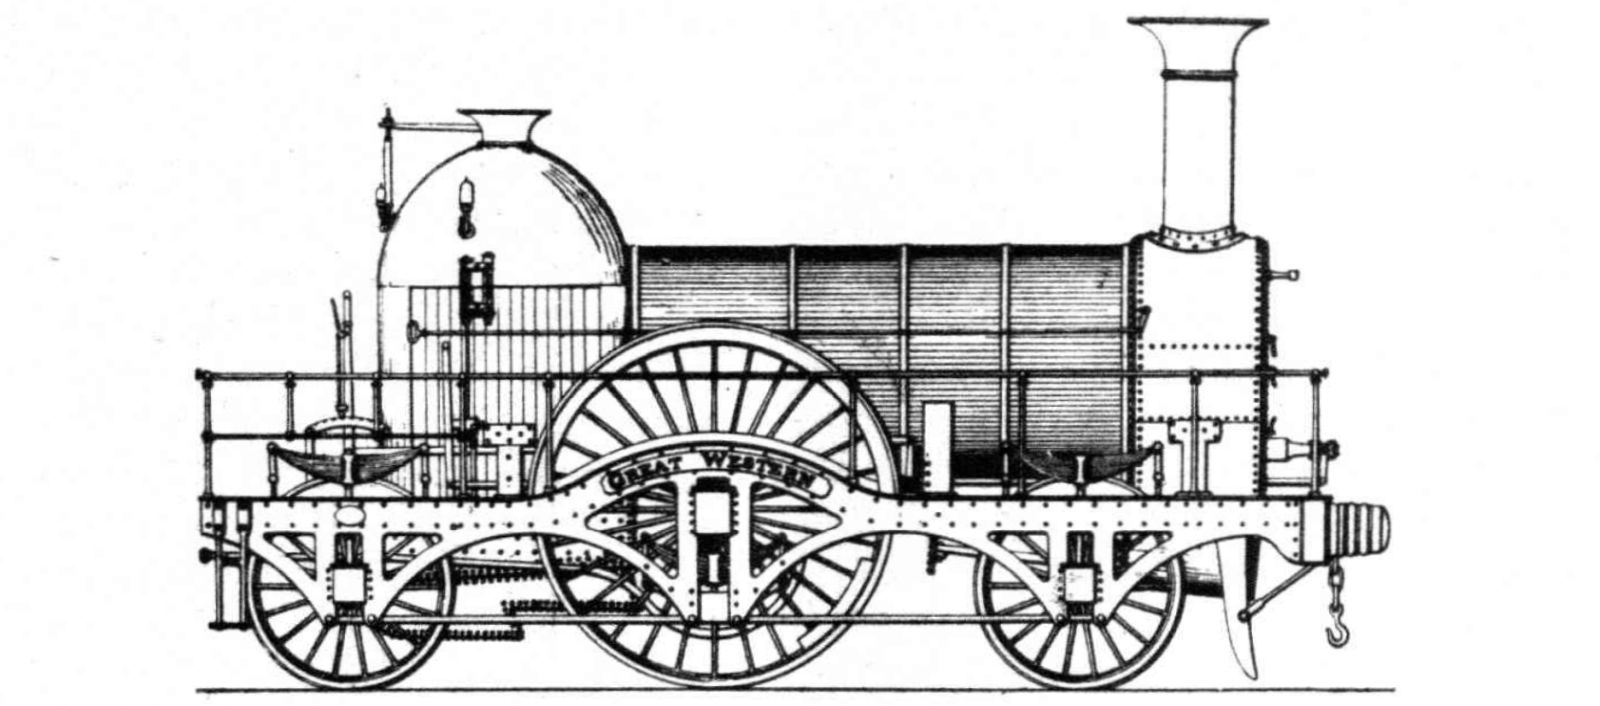 “Great Western” in its original condition